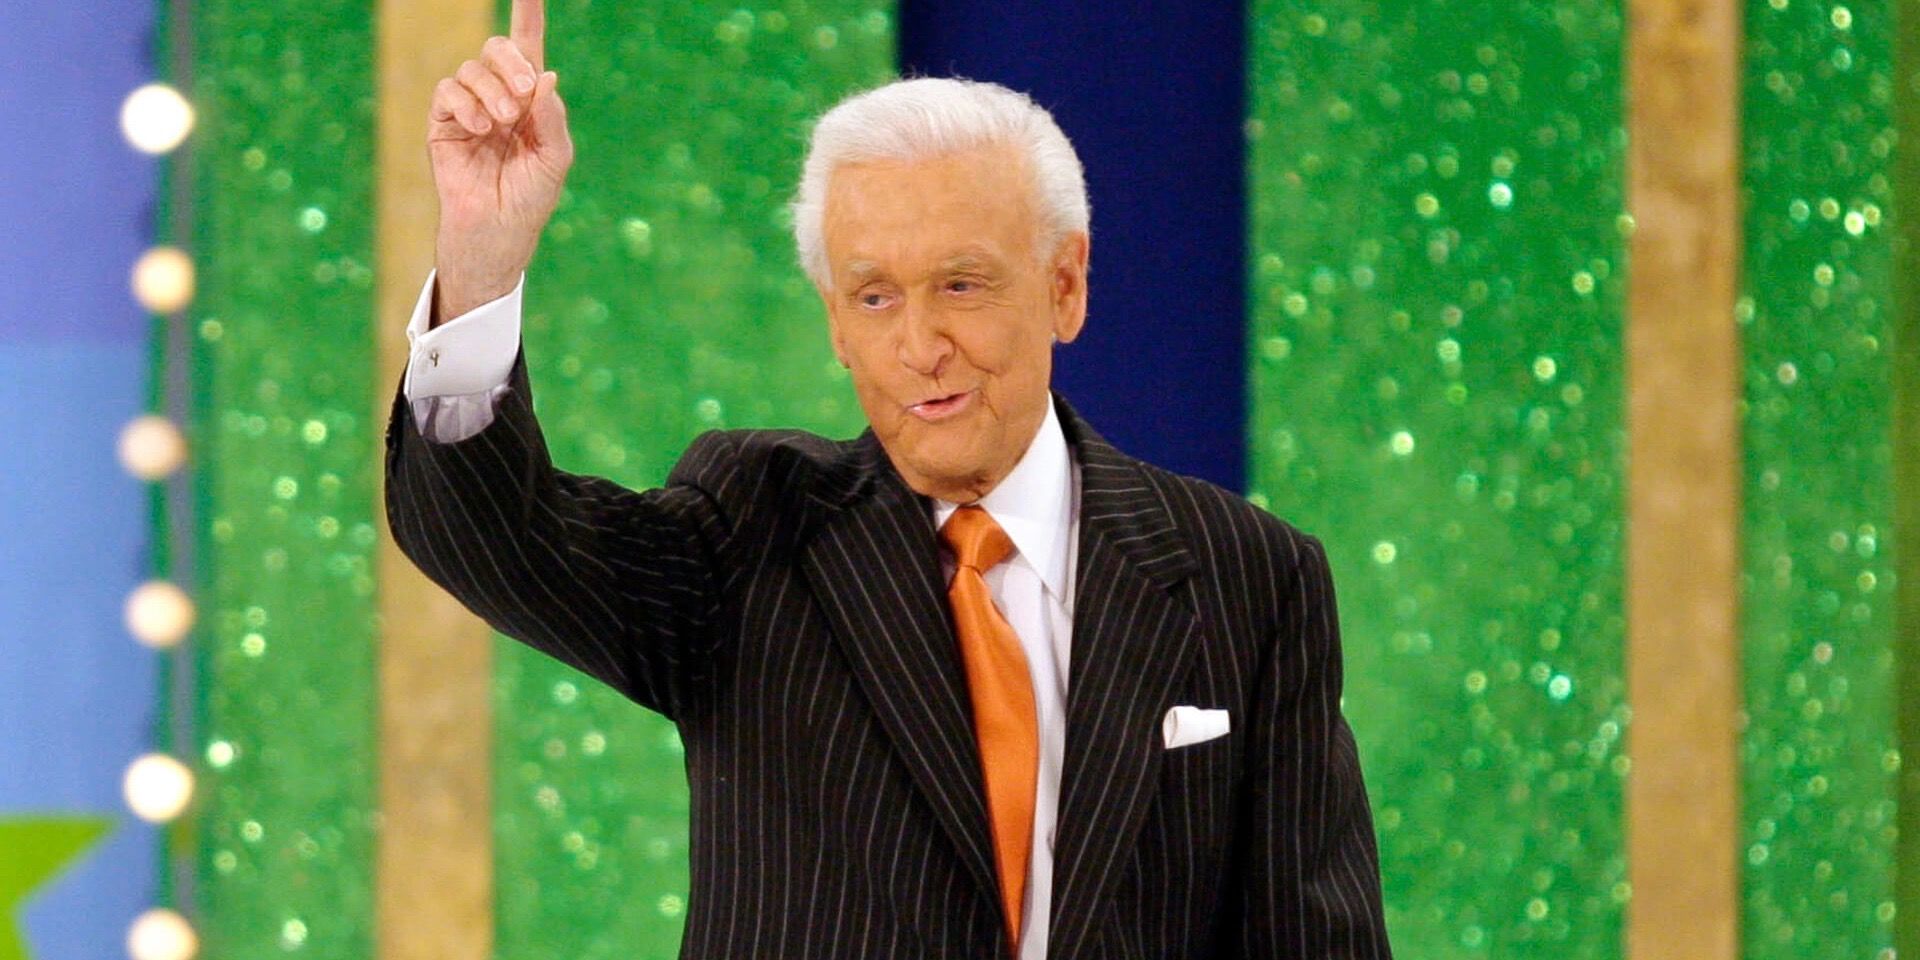 Bob Barker hosting The Price is Right.